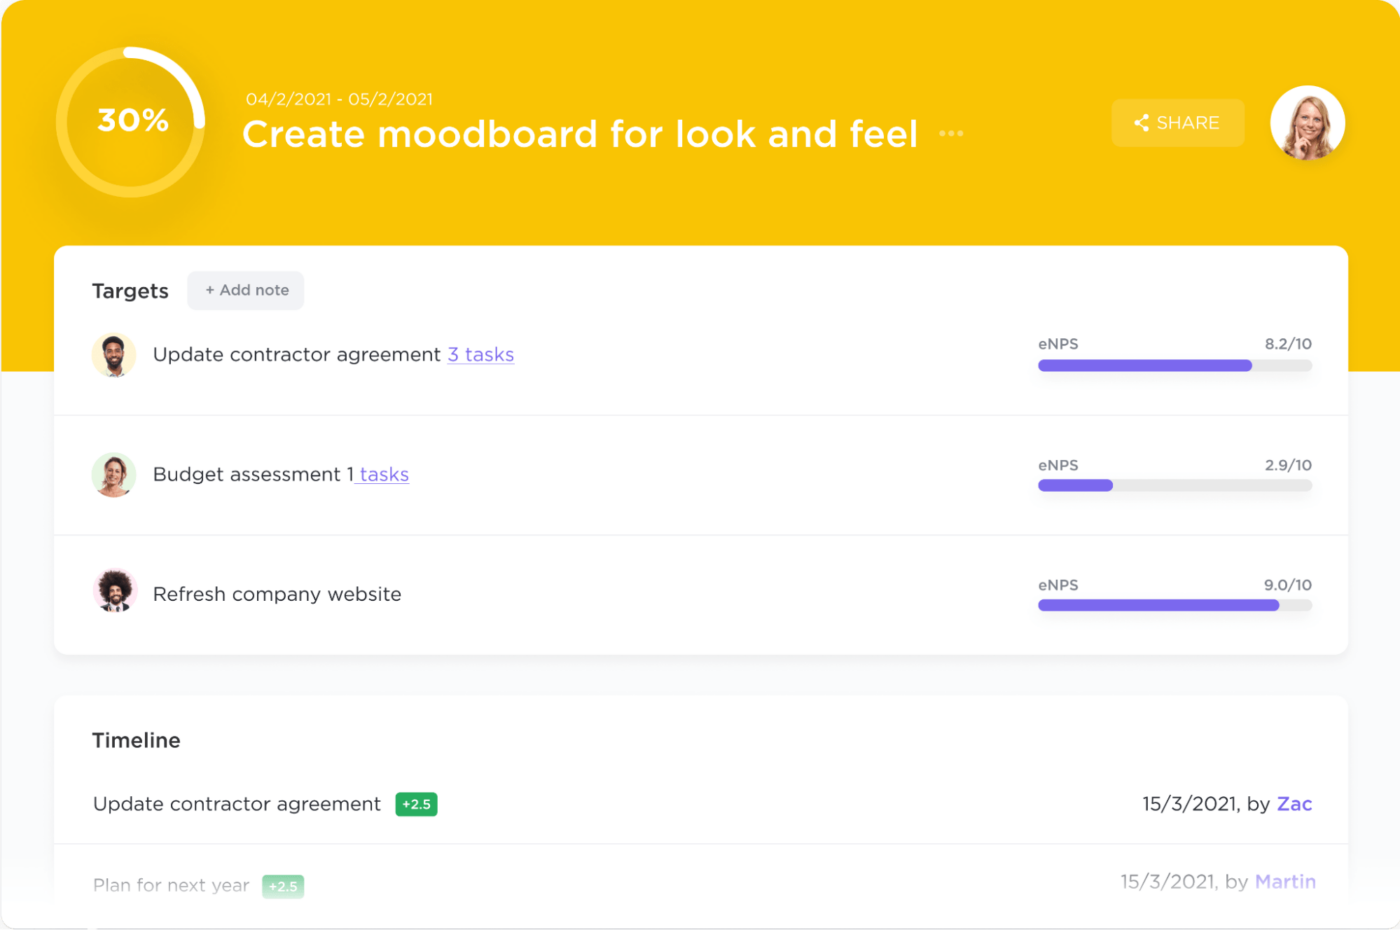 4 Functions of Management: tracking team members’ progress in ClickUp